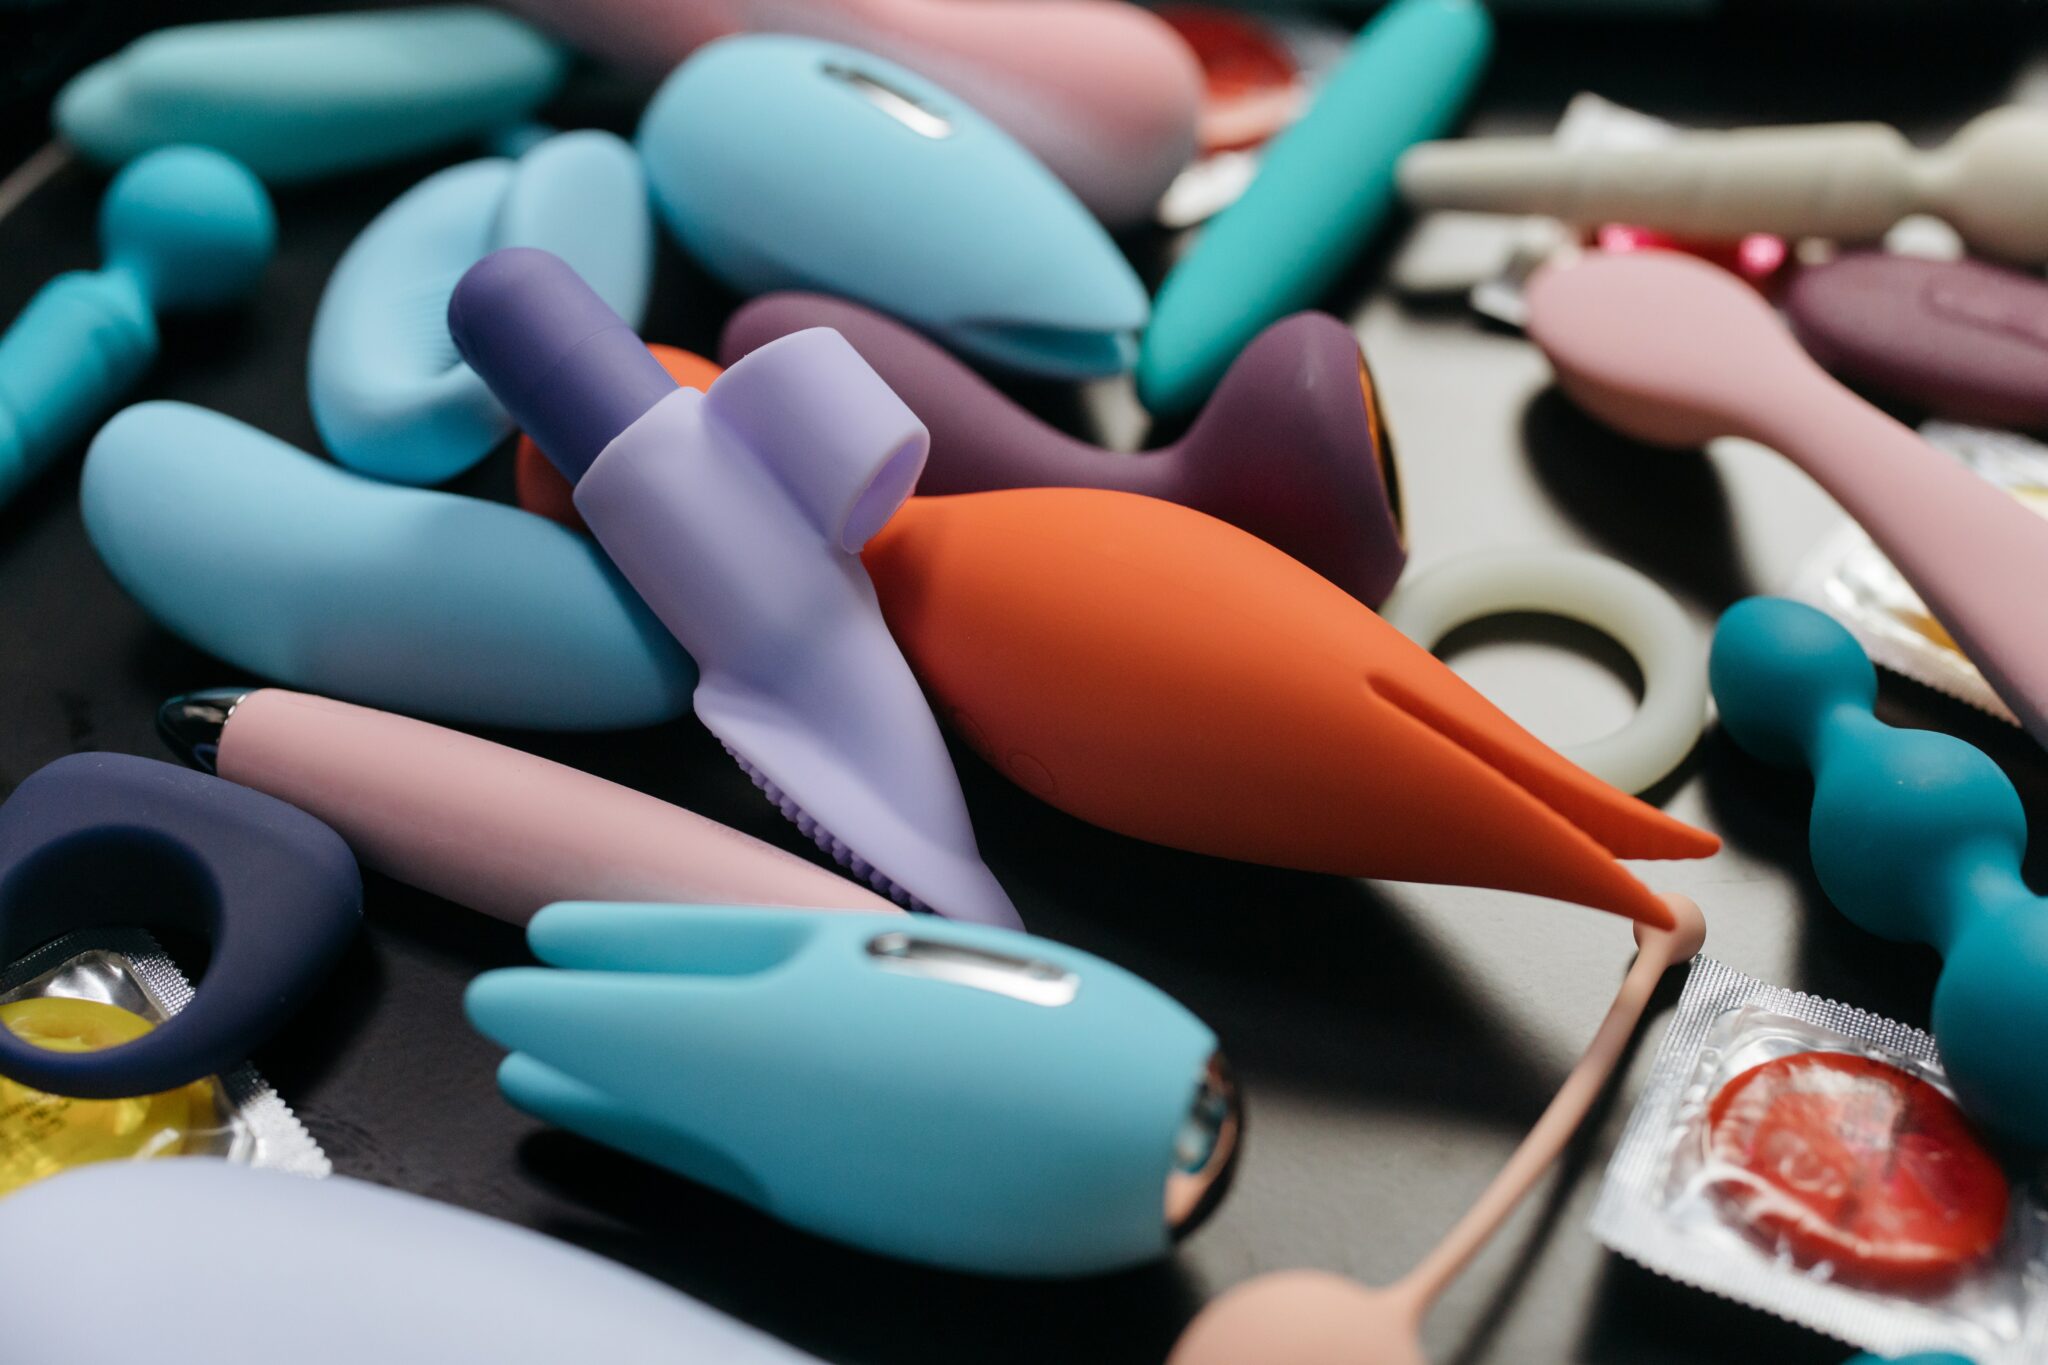 A tray full of colorful vibrators for women.